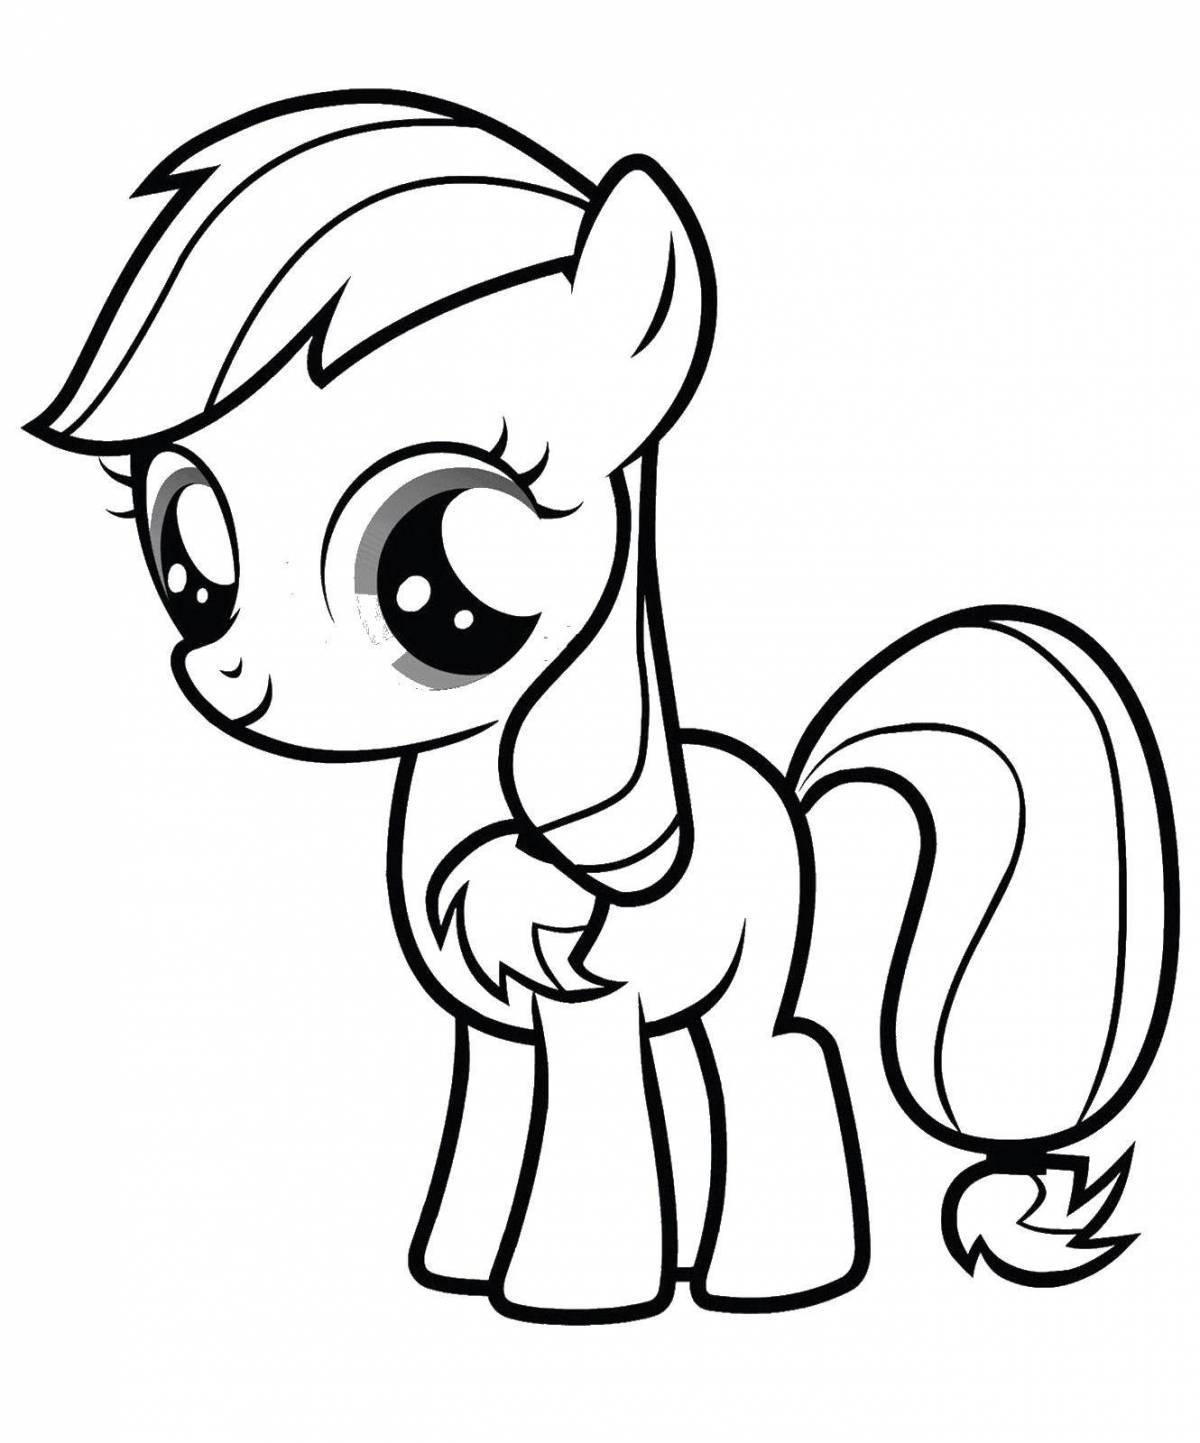 Magic pony coloring pages